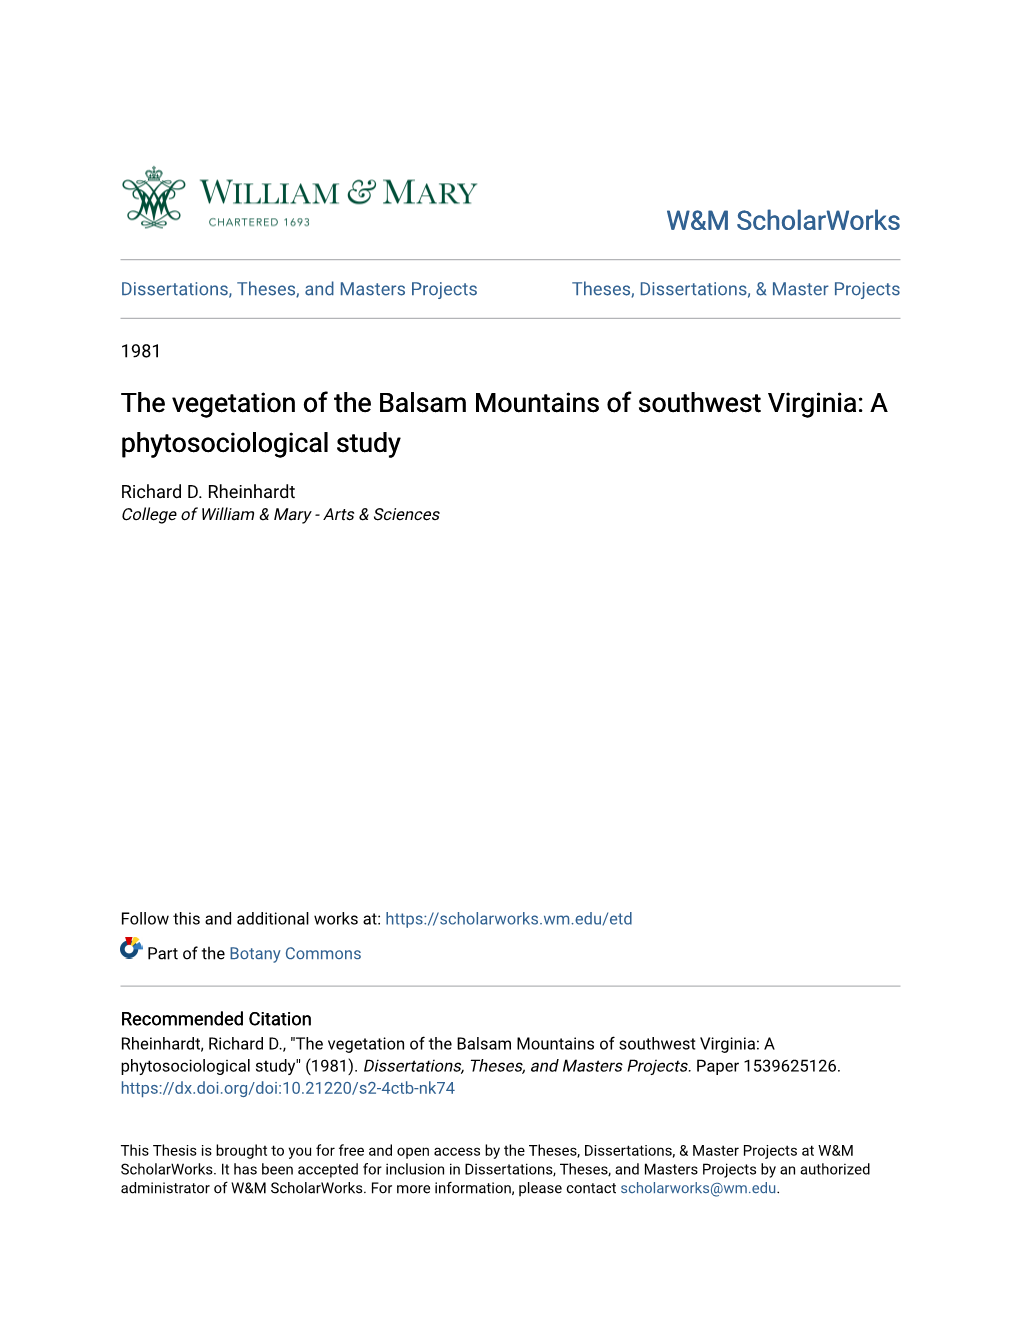 The Vegetation of the Balsam Mountains of Southwest Virginia: a Phytosociological Study